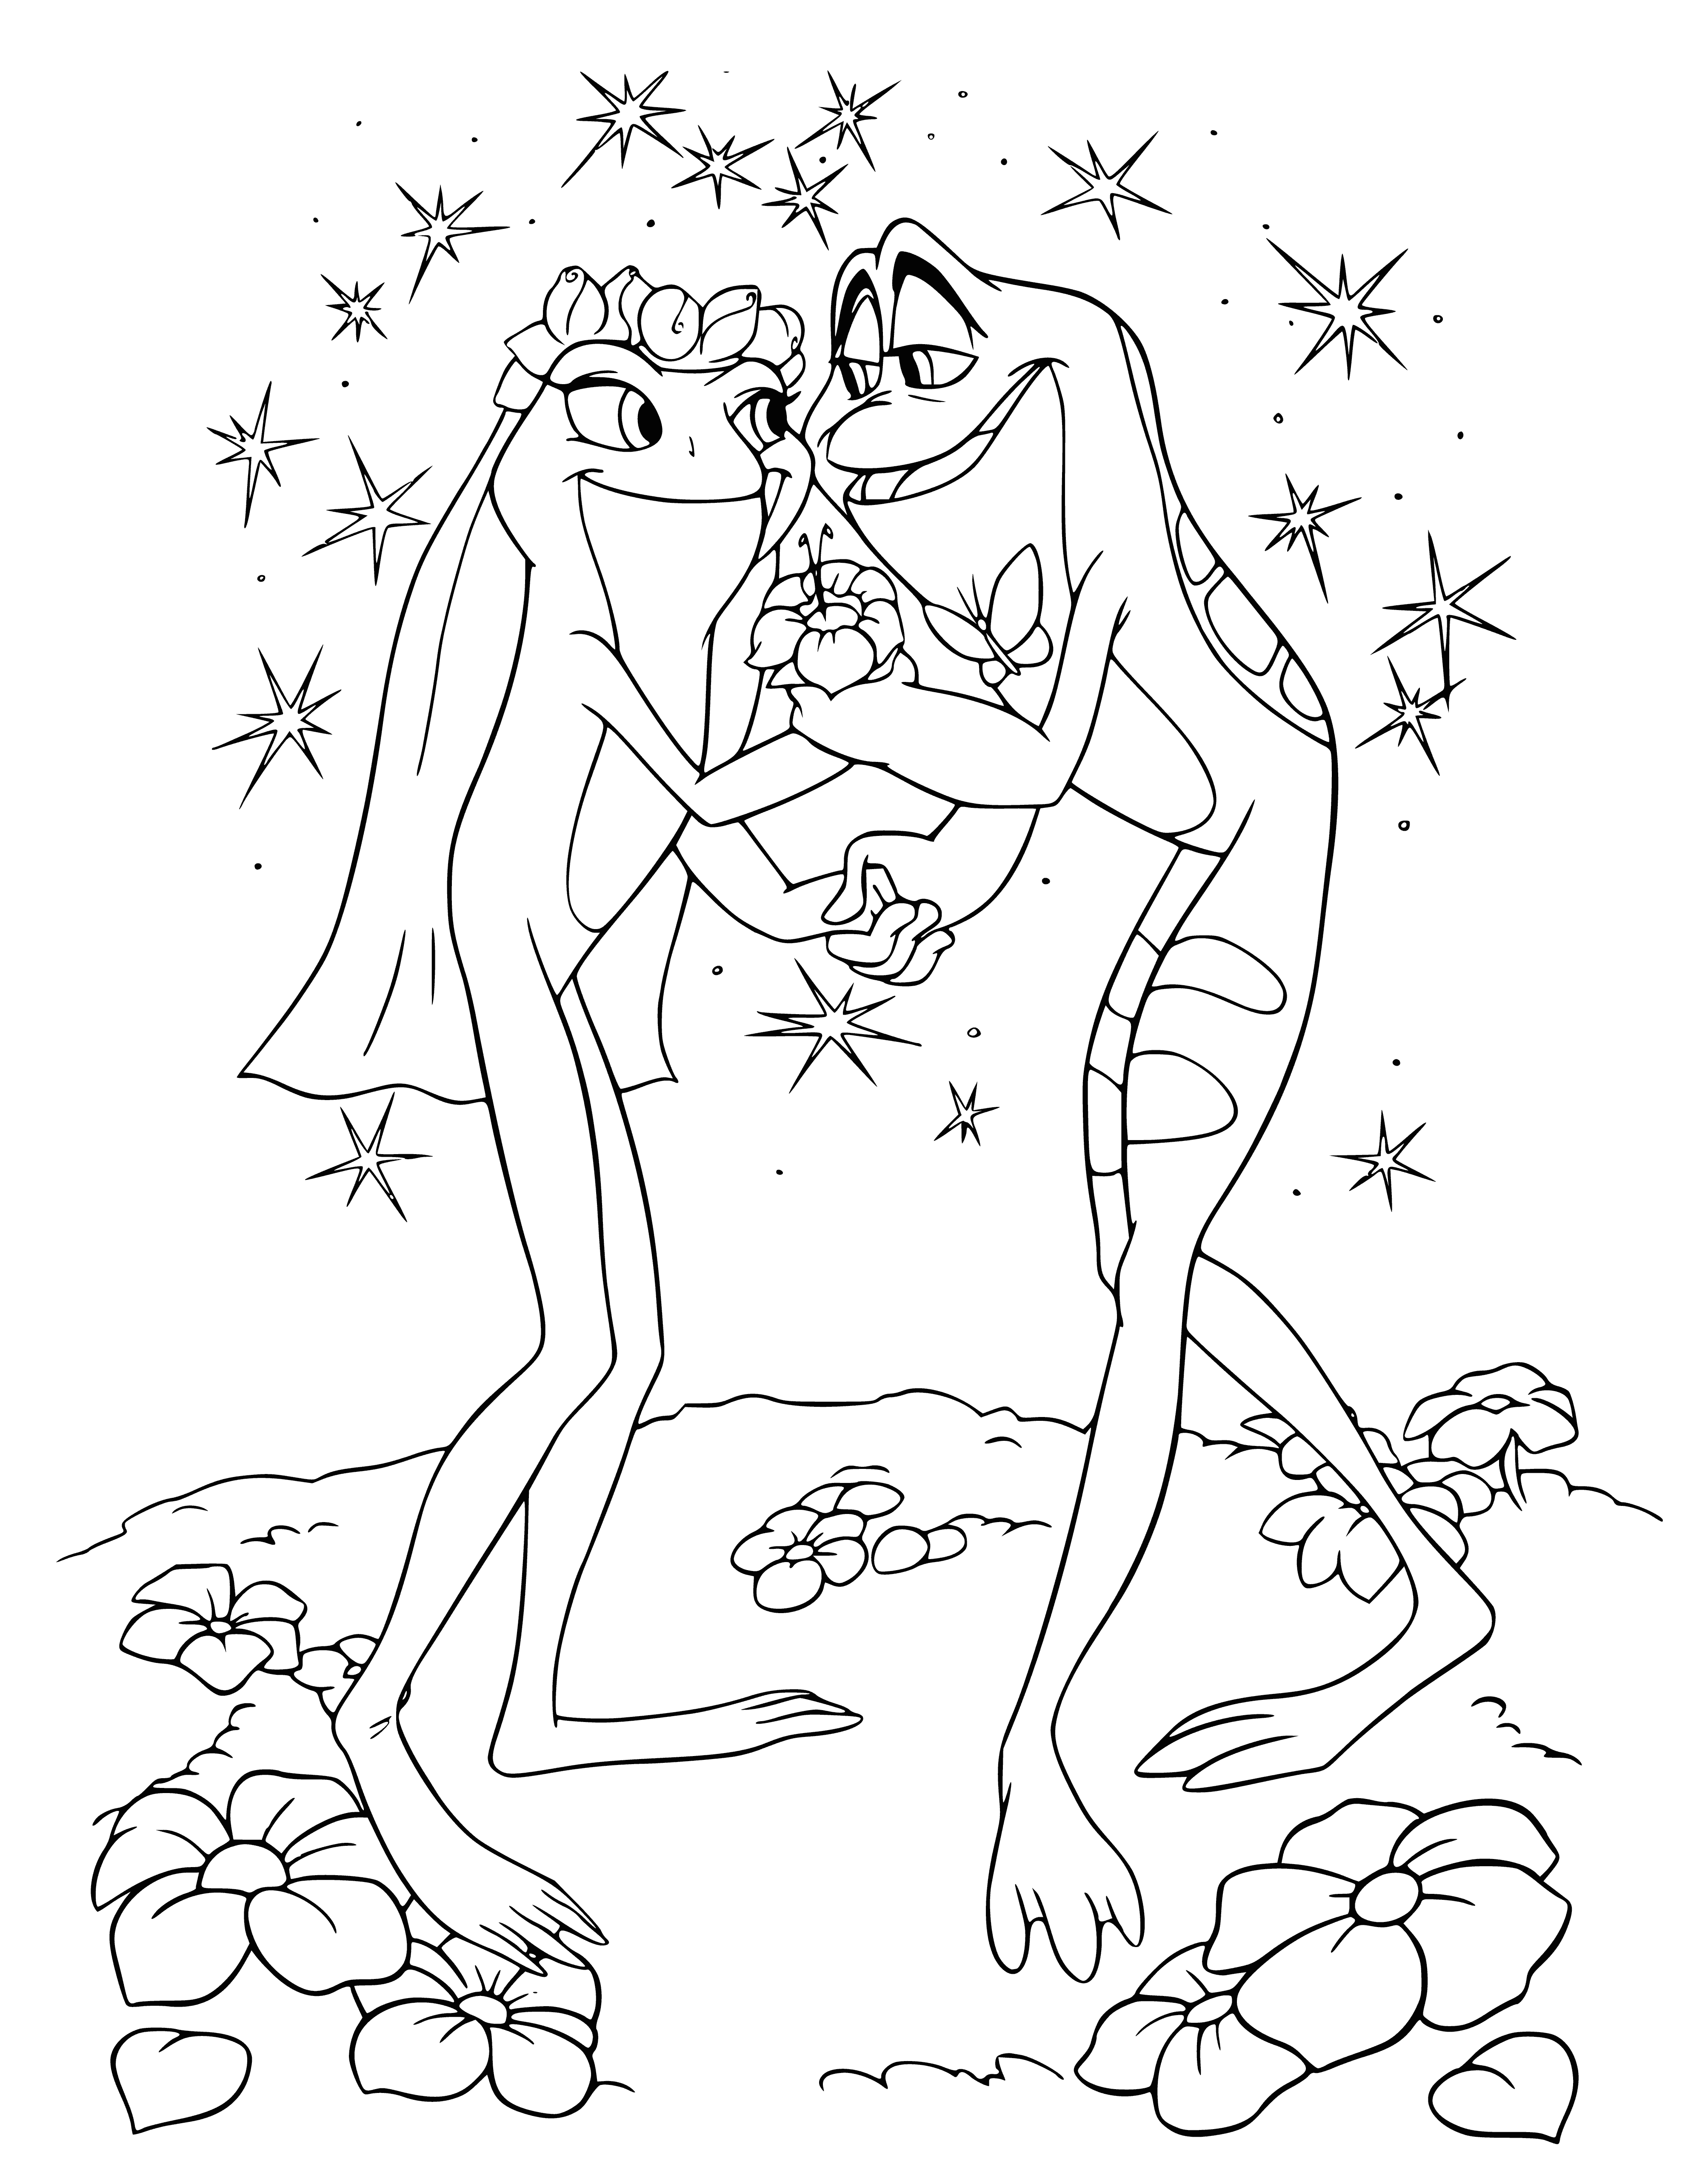 Tiana and Navin coloring page